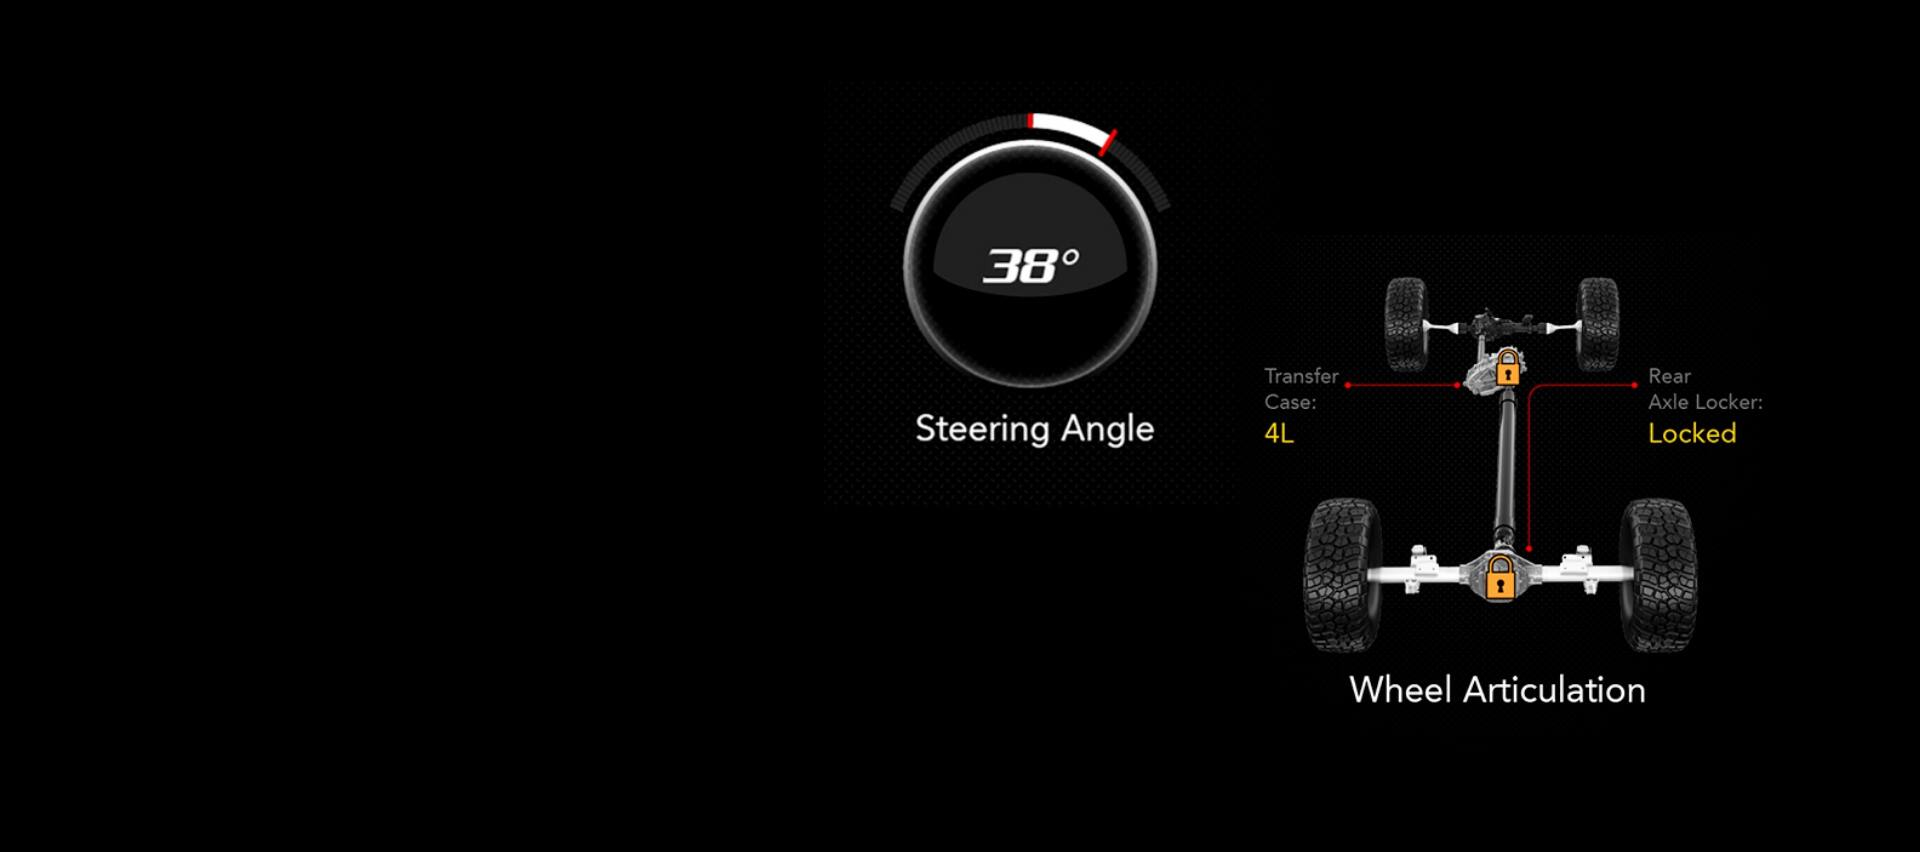 The vehicle dynamics screen displaying the steering angle and wheel articulation.